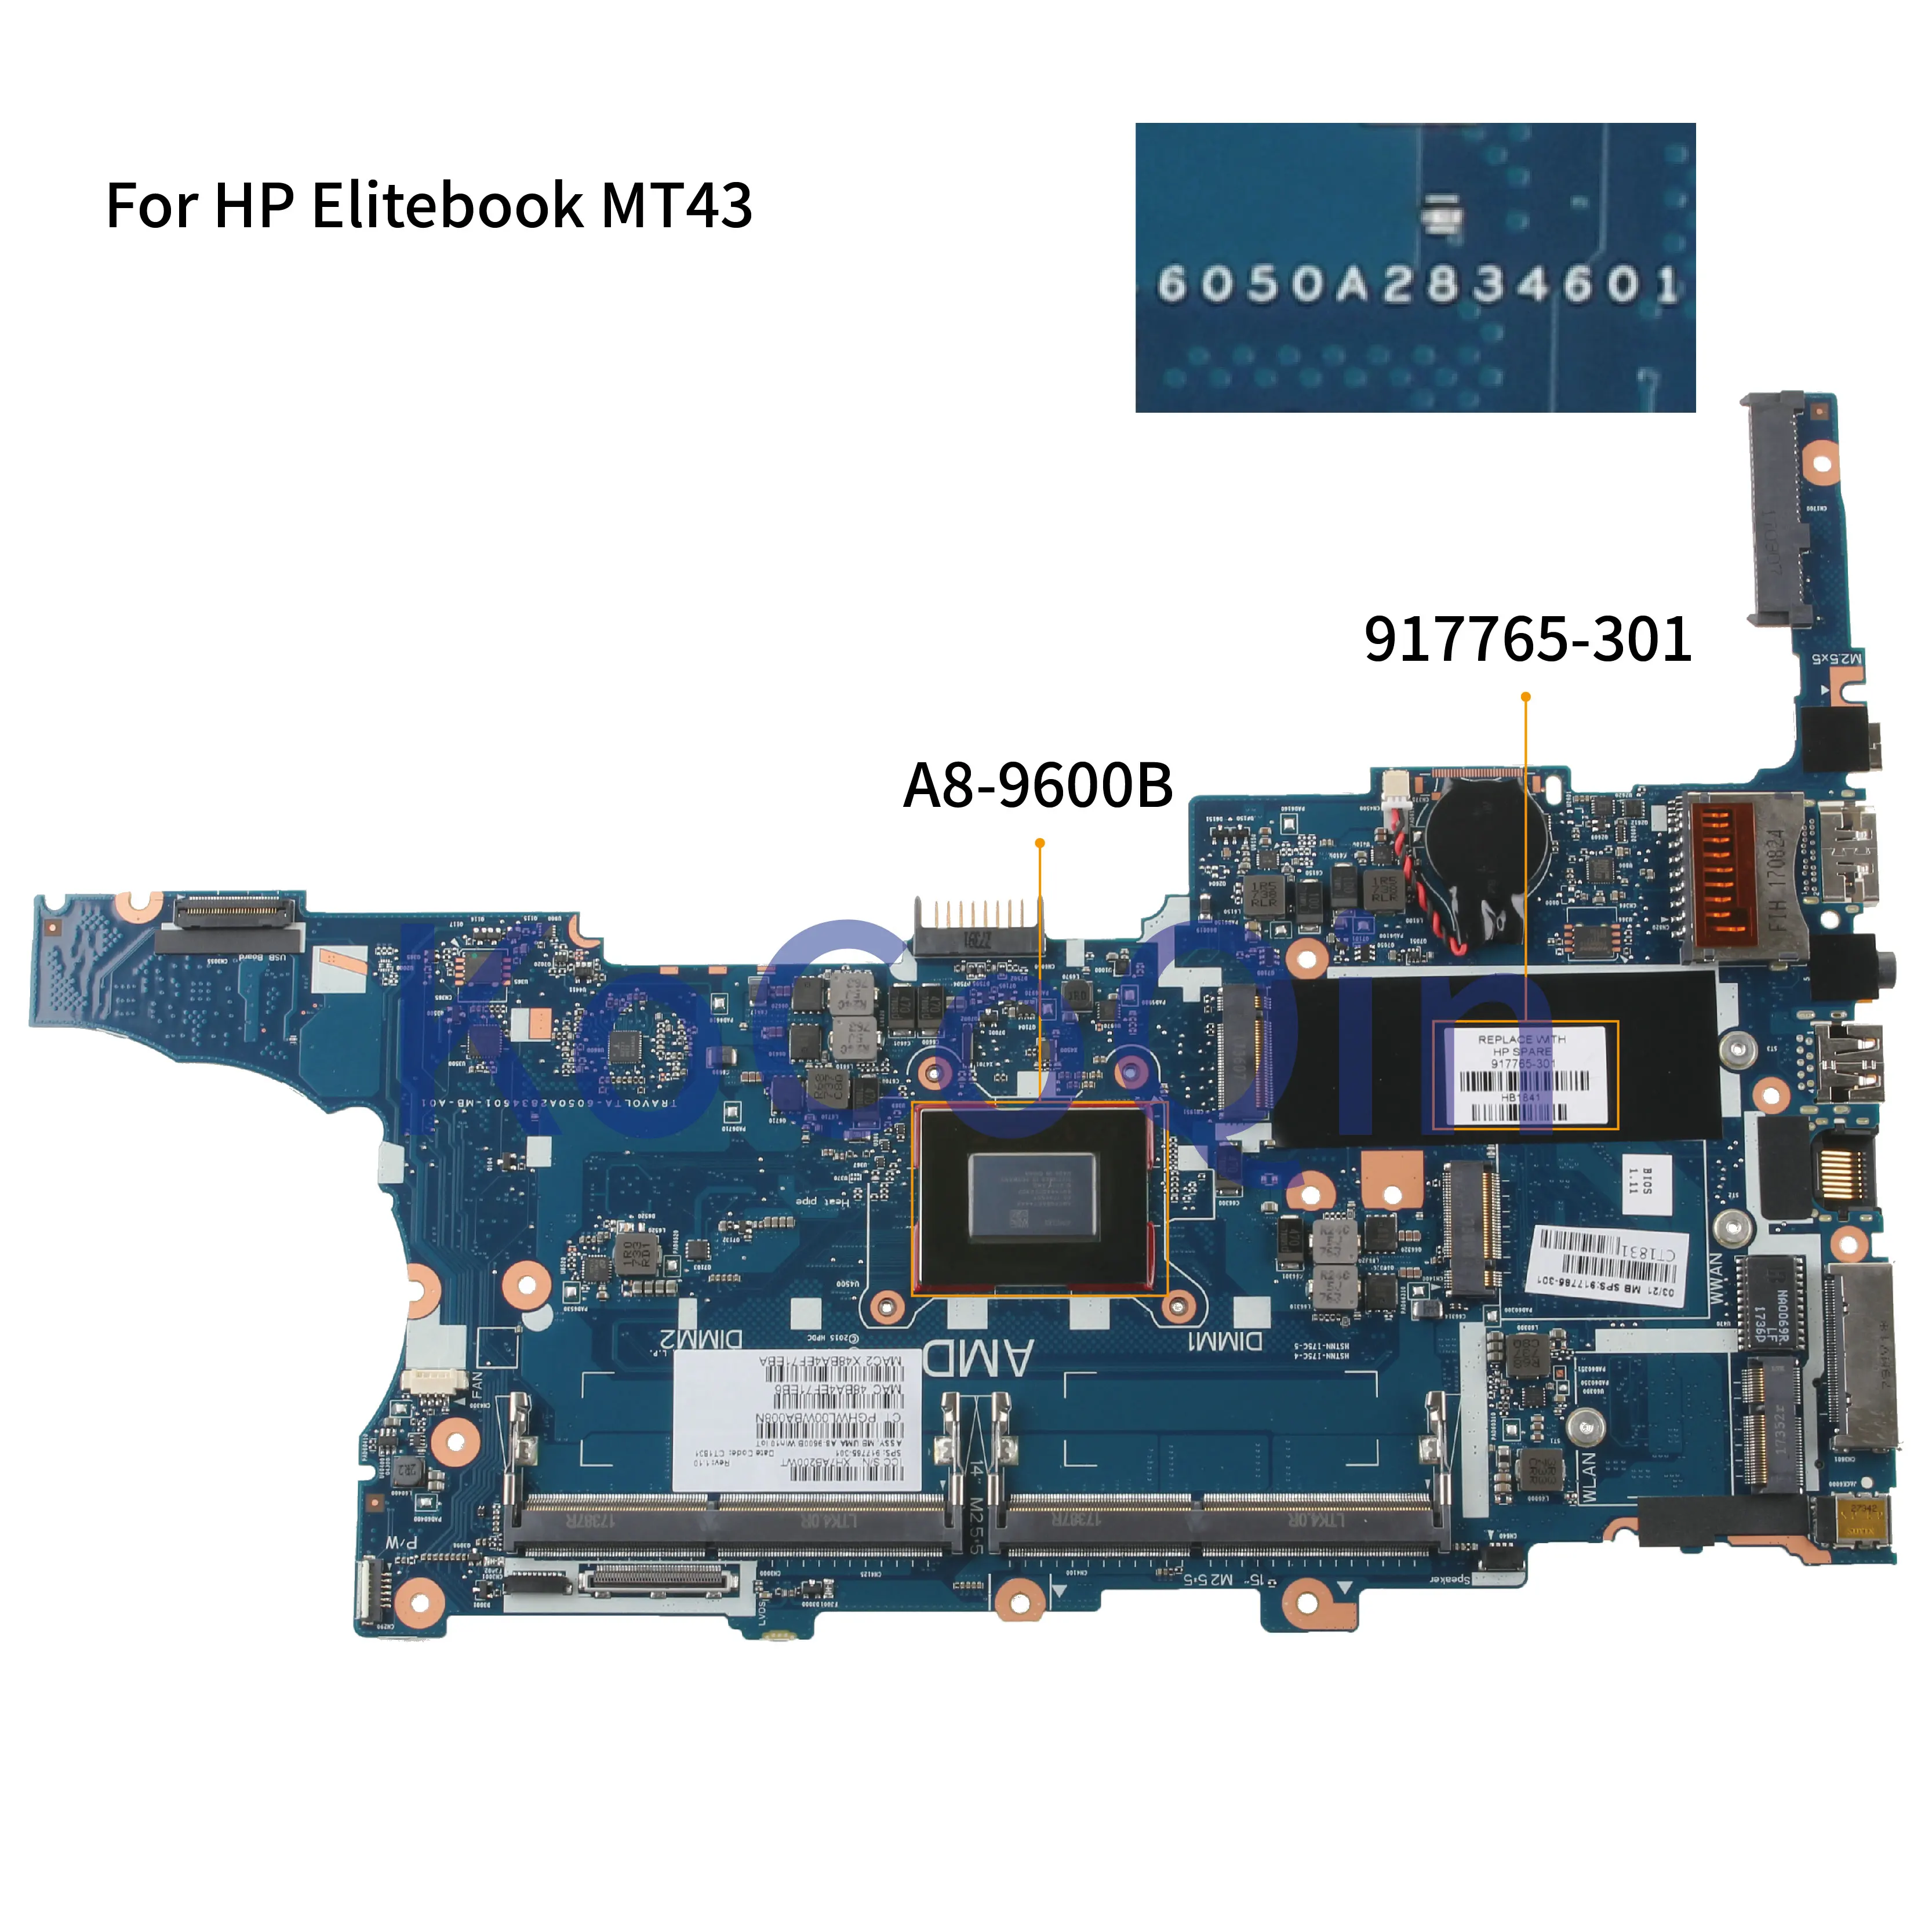 Low Price  KoCoQin Laptop motherboard For HP Elitebook 745 G4 MT43 Mainboard 917765-001 917765-601 6050A283460